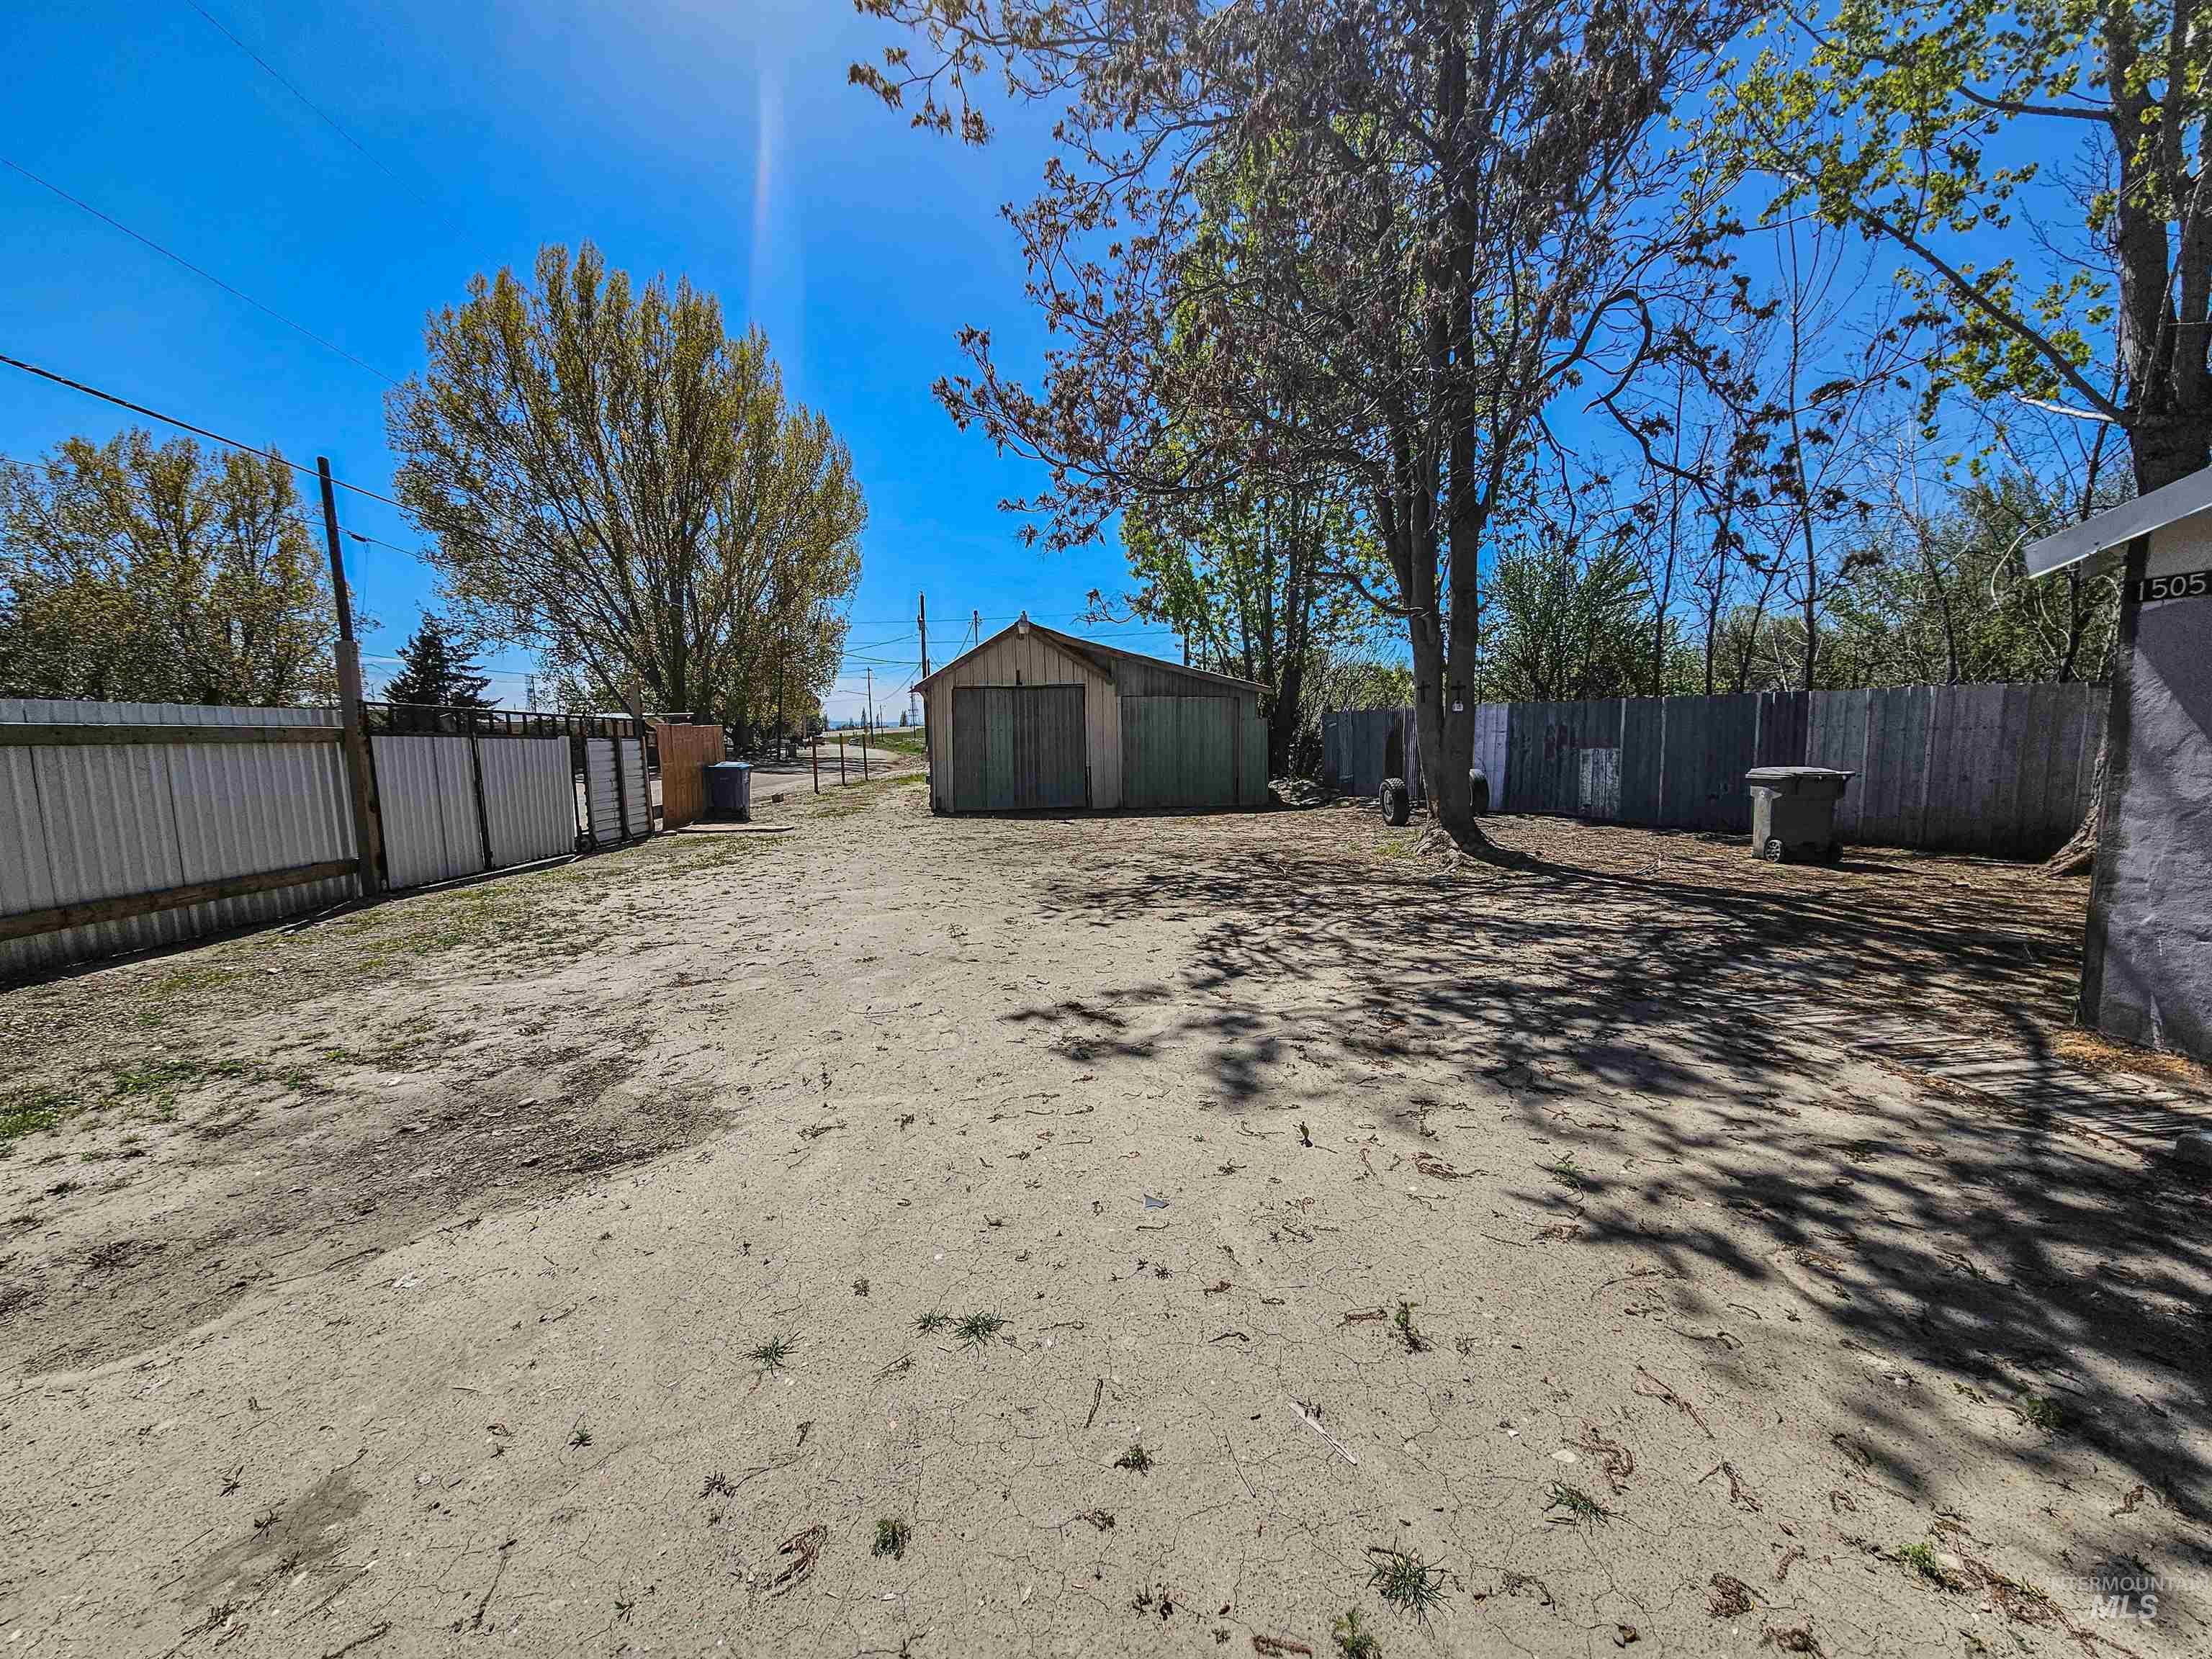 1505 Boise Ave, Caldwell, Idaho 83605, Land For Sale, Price $199,000,MLS 98907573